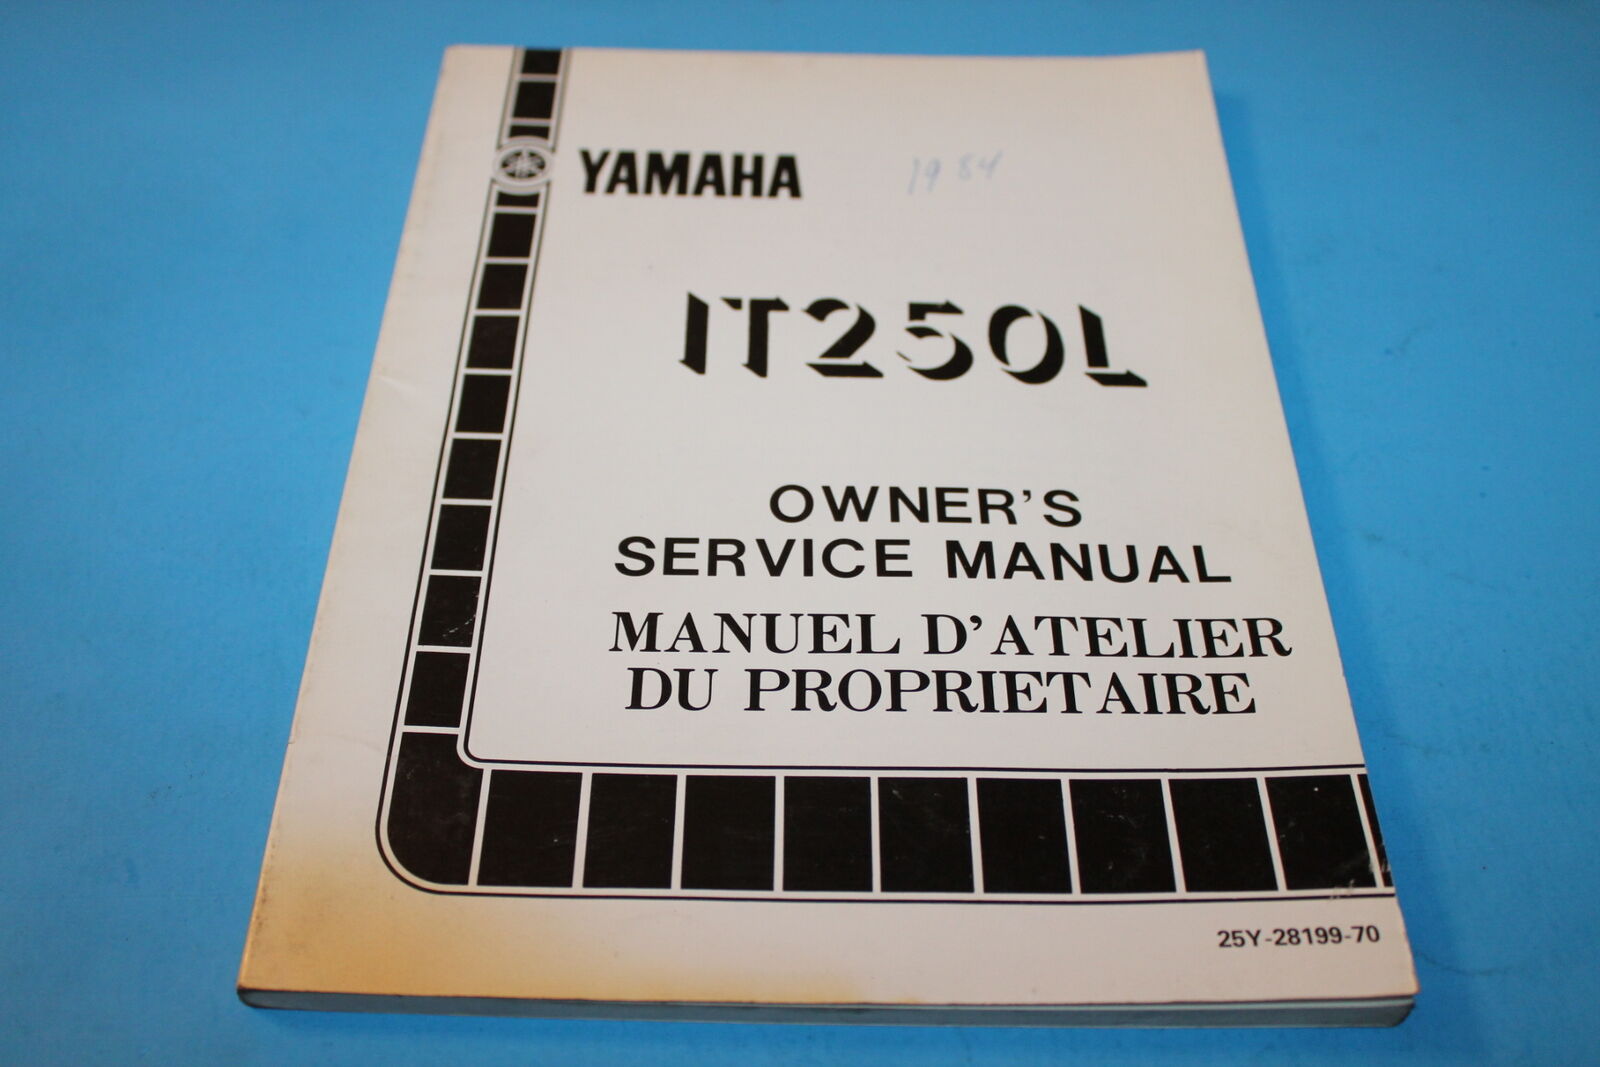 Yamaha 1984 IT250L OWNER\'S SERVICE MANUAL 25Y-28199-70